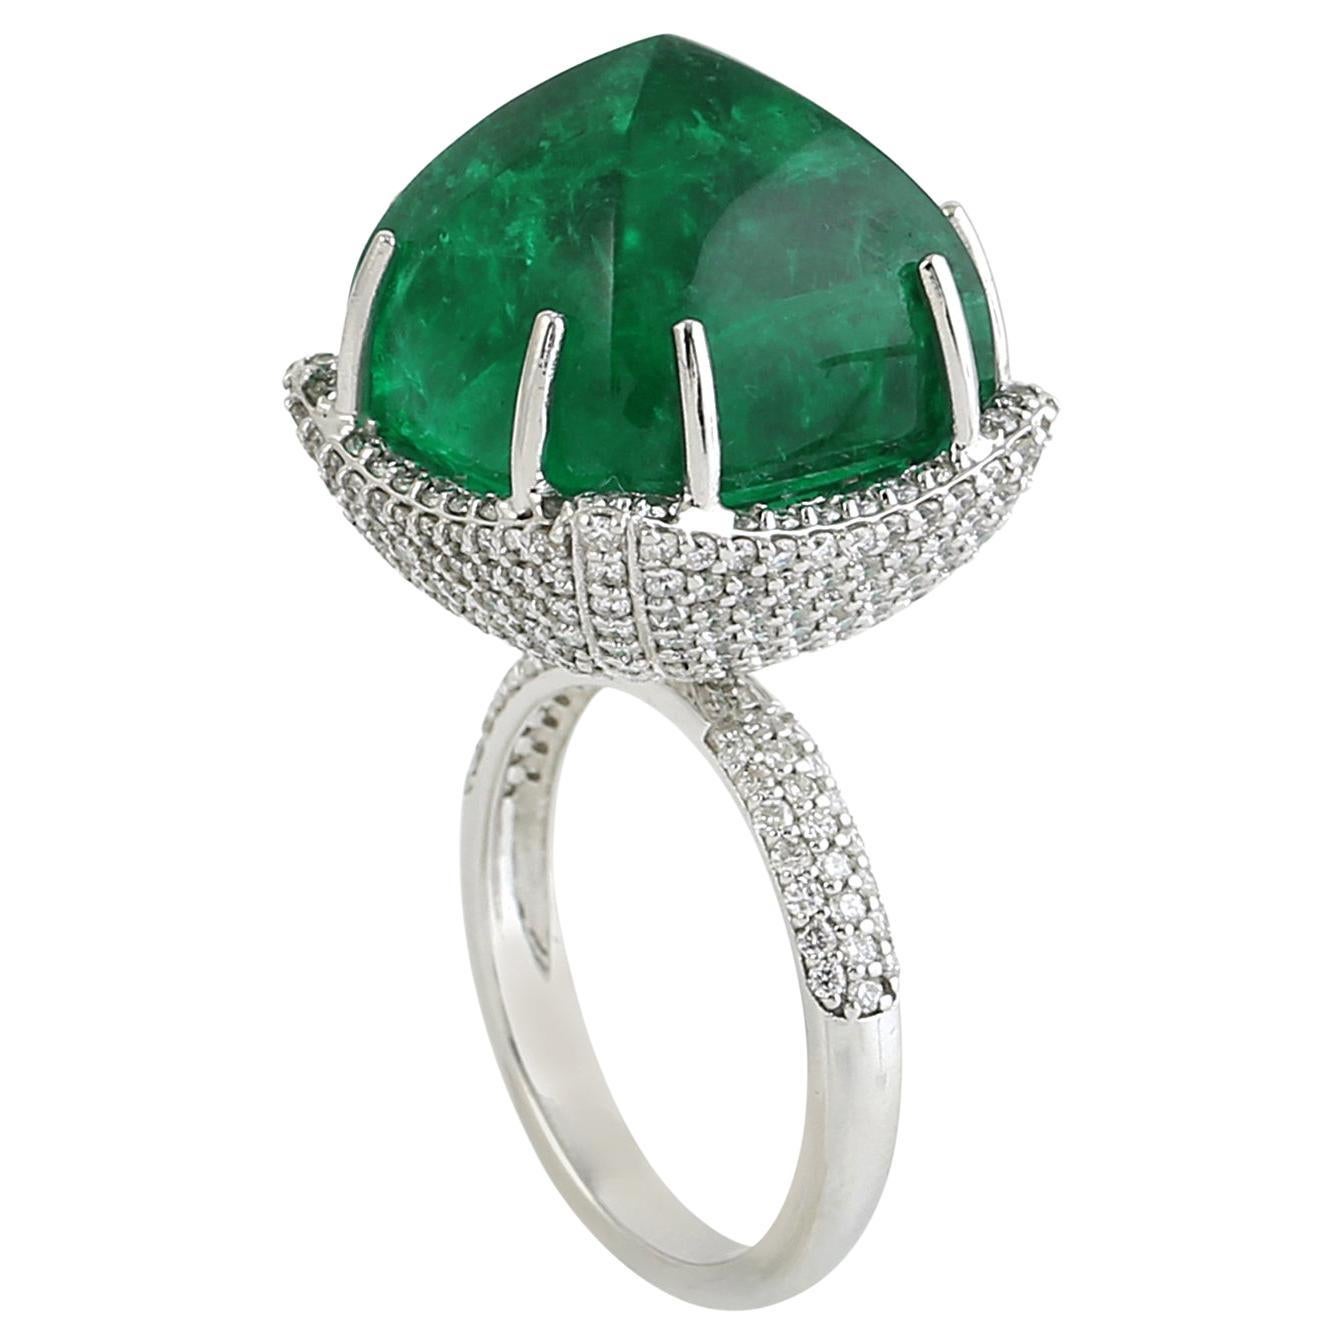 24.61ct Emerald Cocktail Ring With Diamonds Made In 18k White Gold For Sale